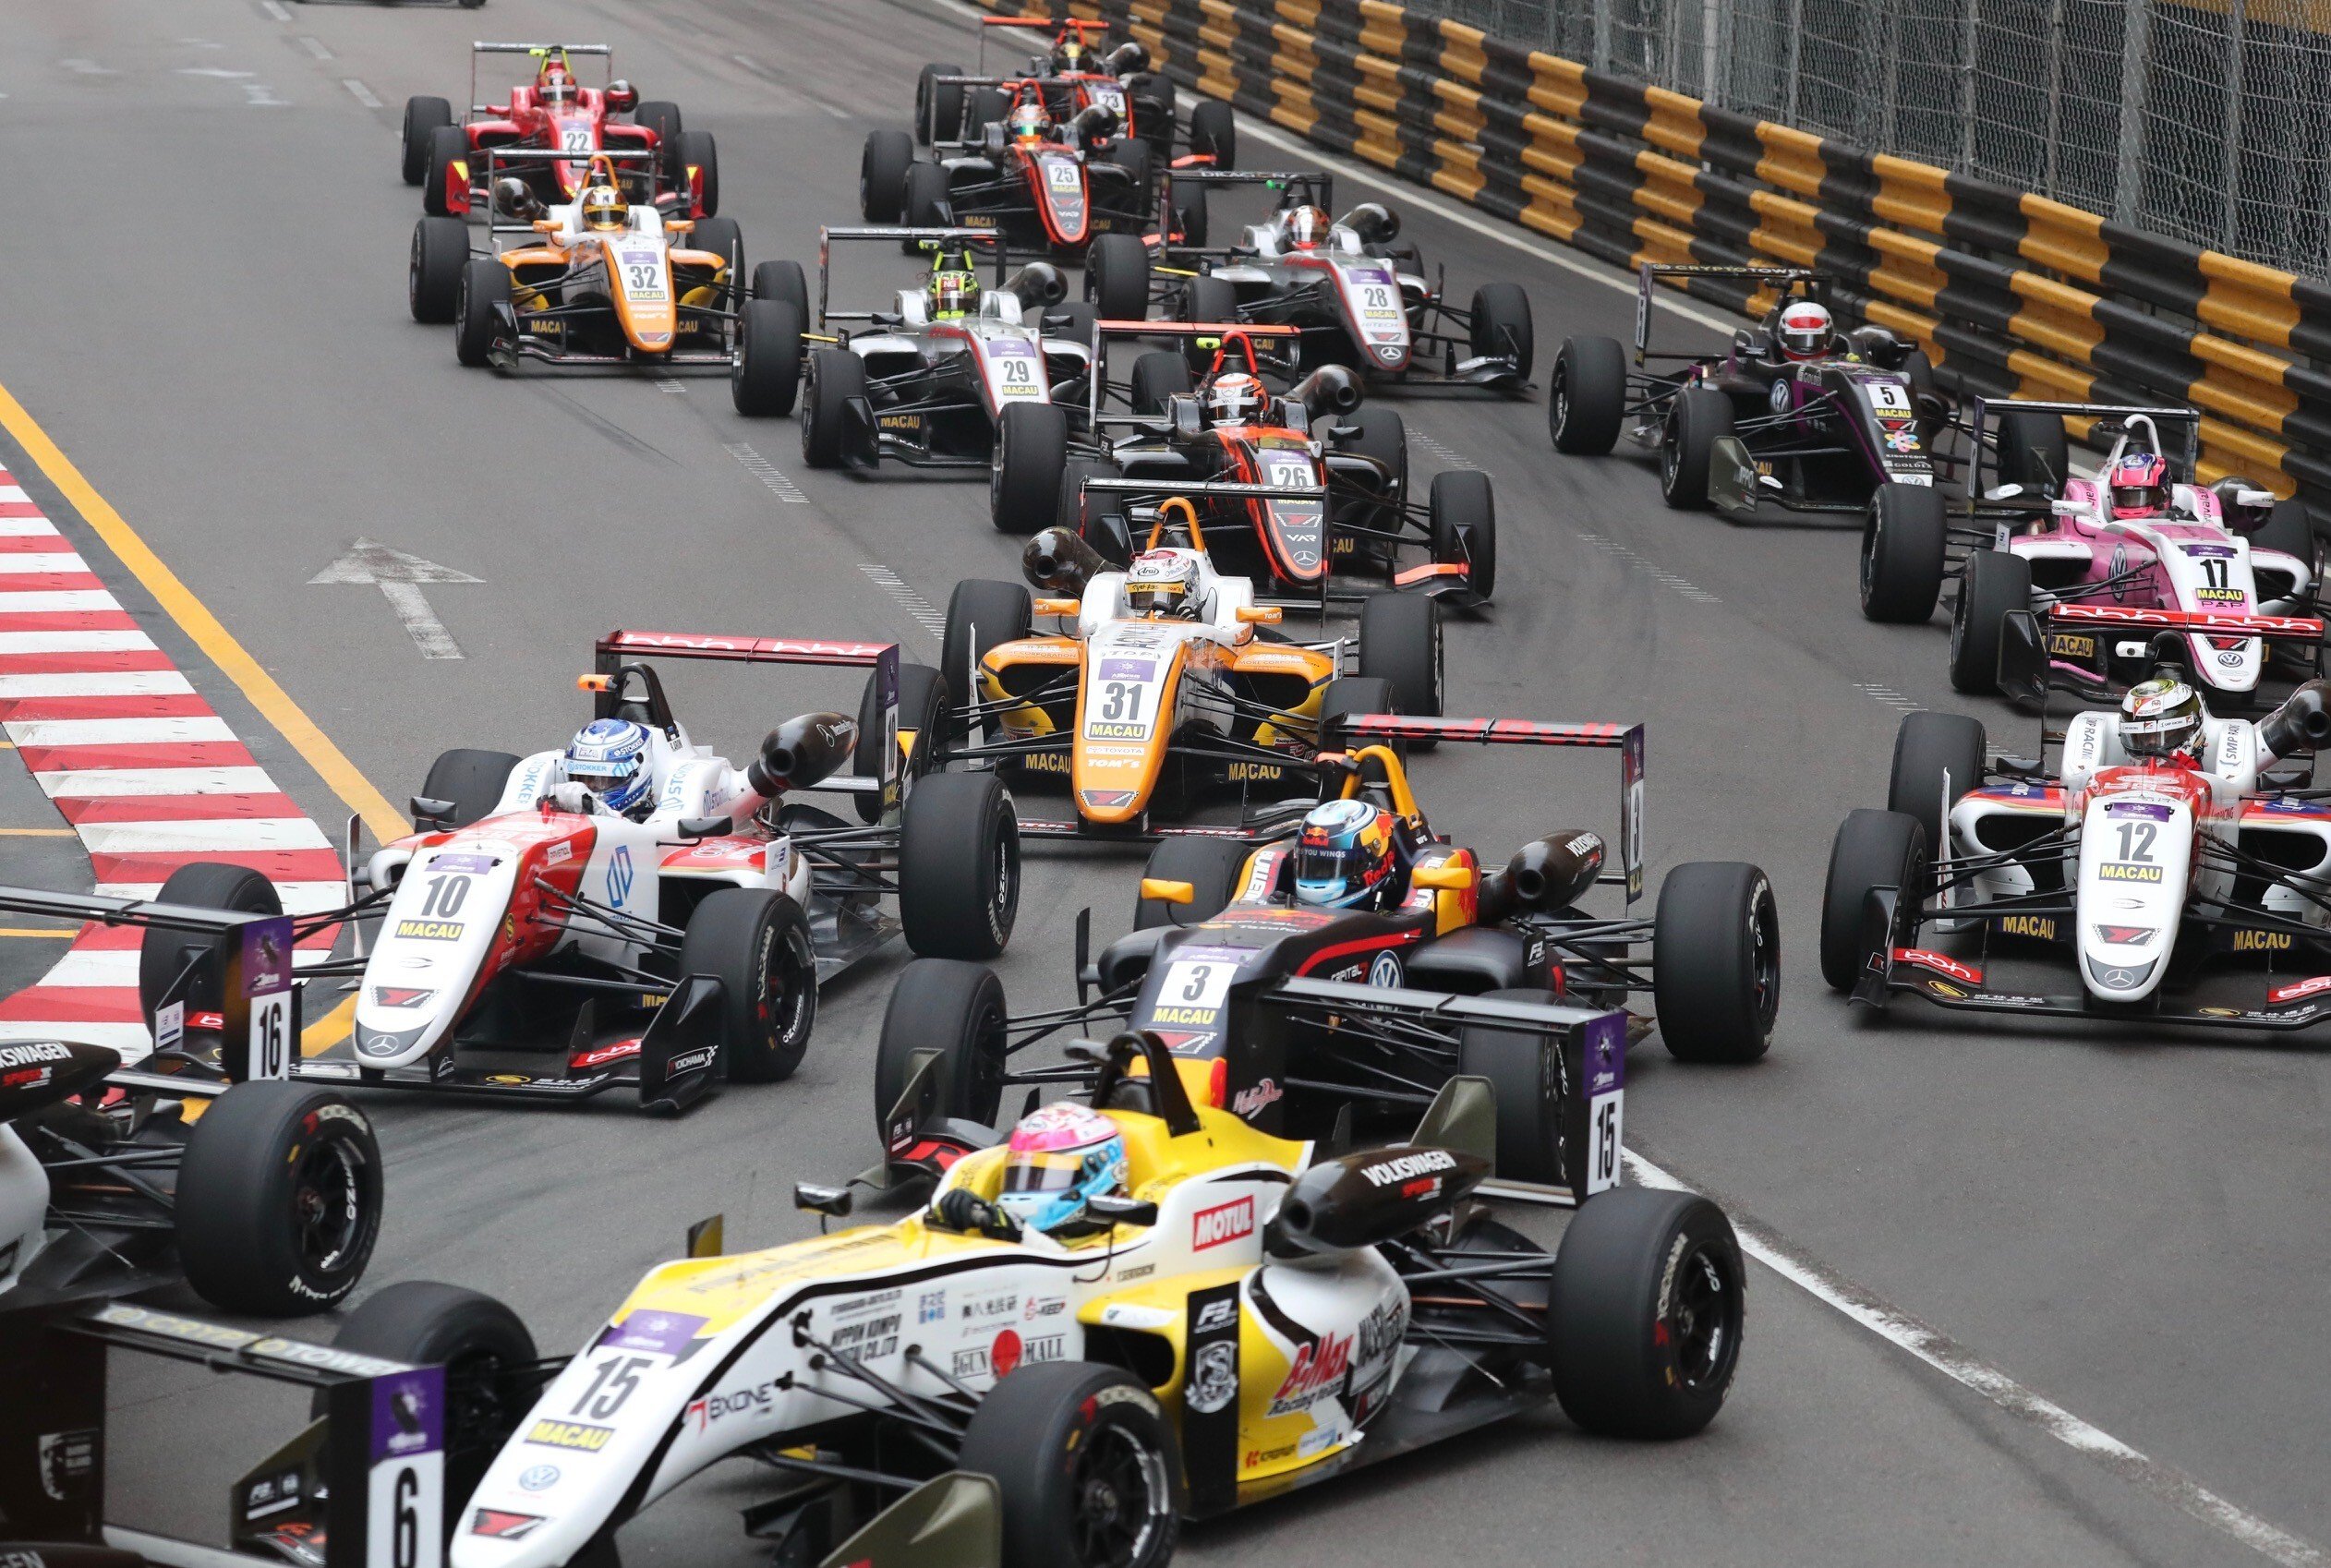 Formula Three cars will not be part of this year’s Macau Grand Prix. Photo: K.Y. Cheng